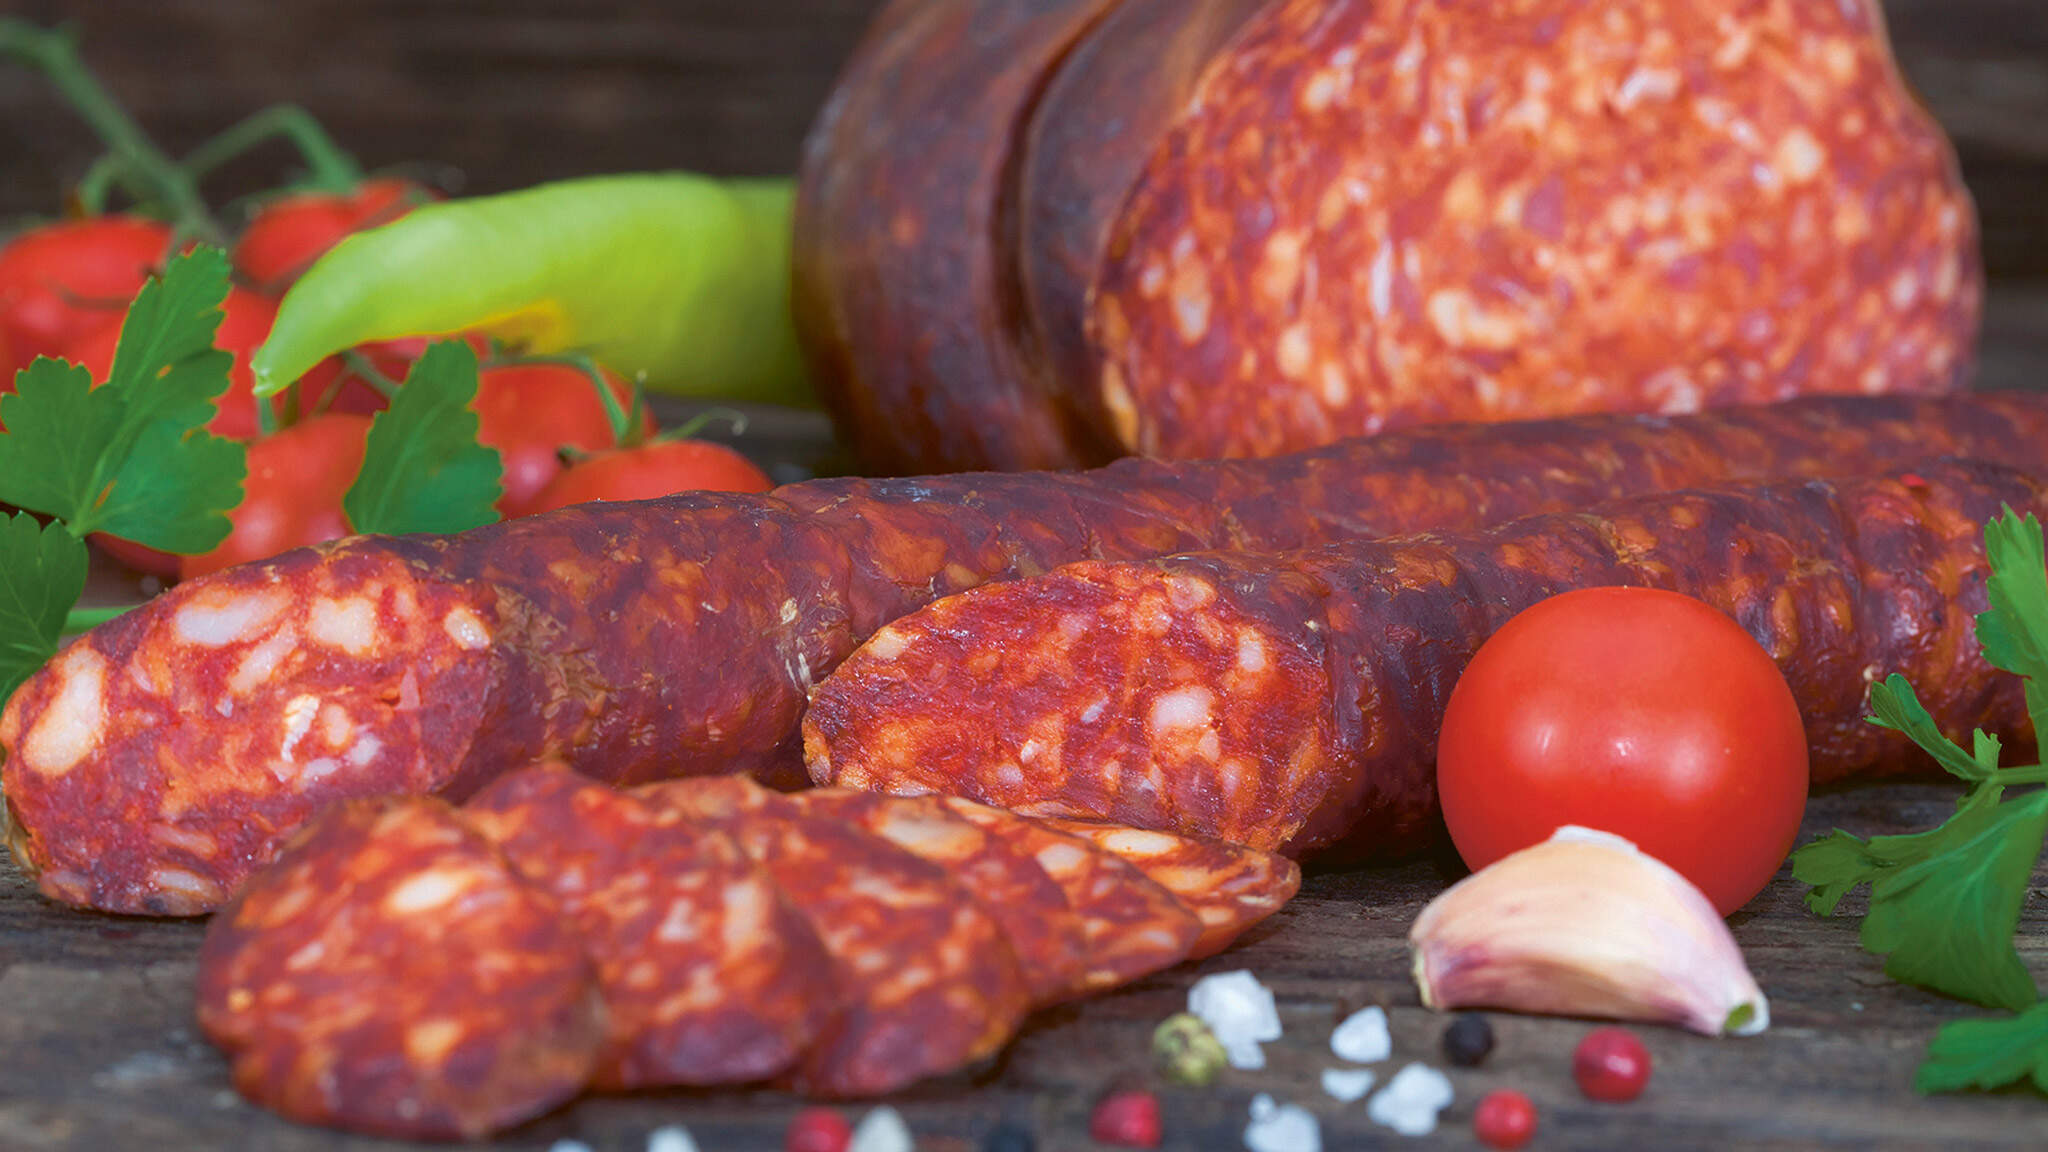 Hungarian sausage is beloved the world over